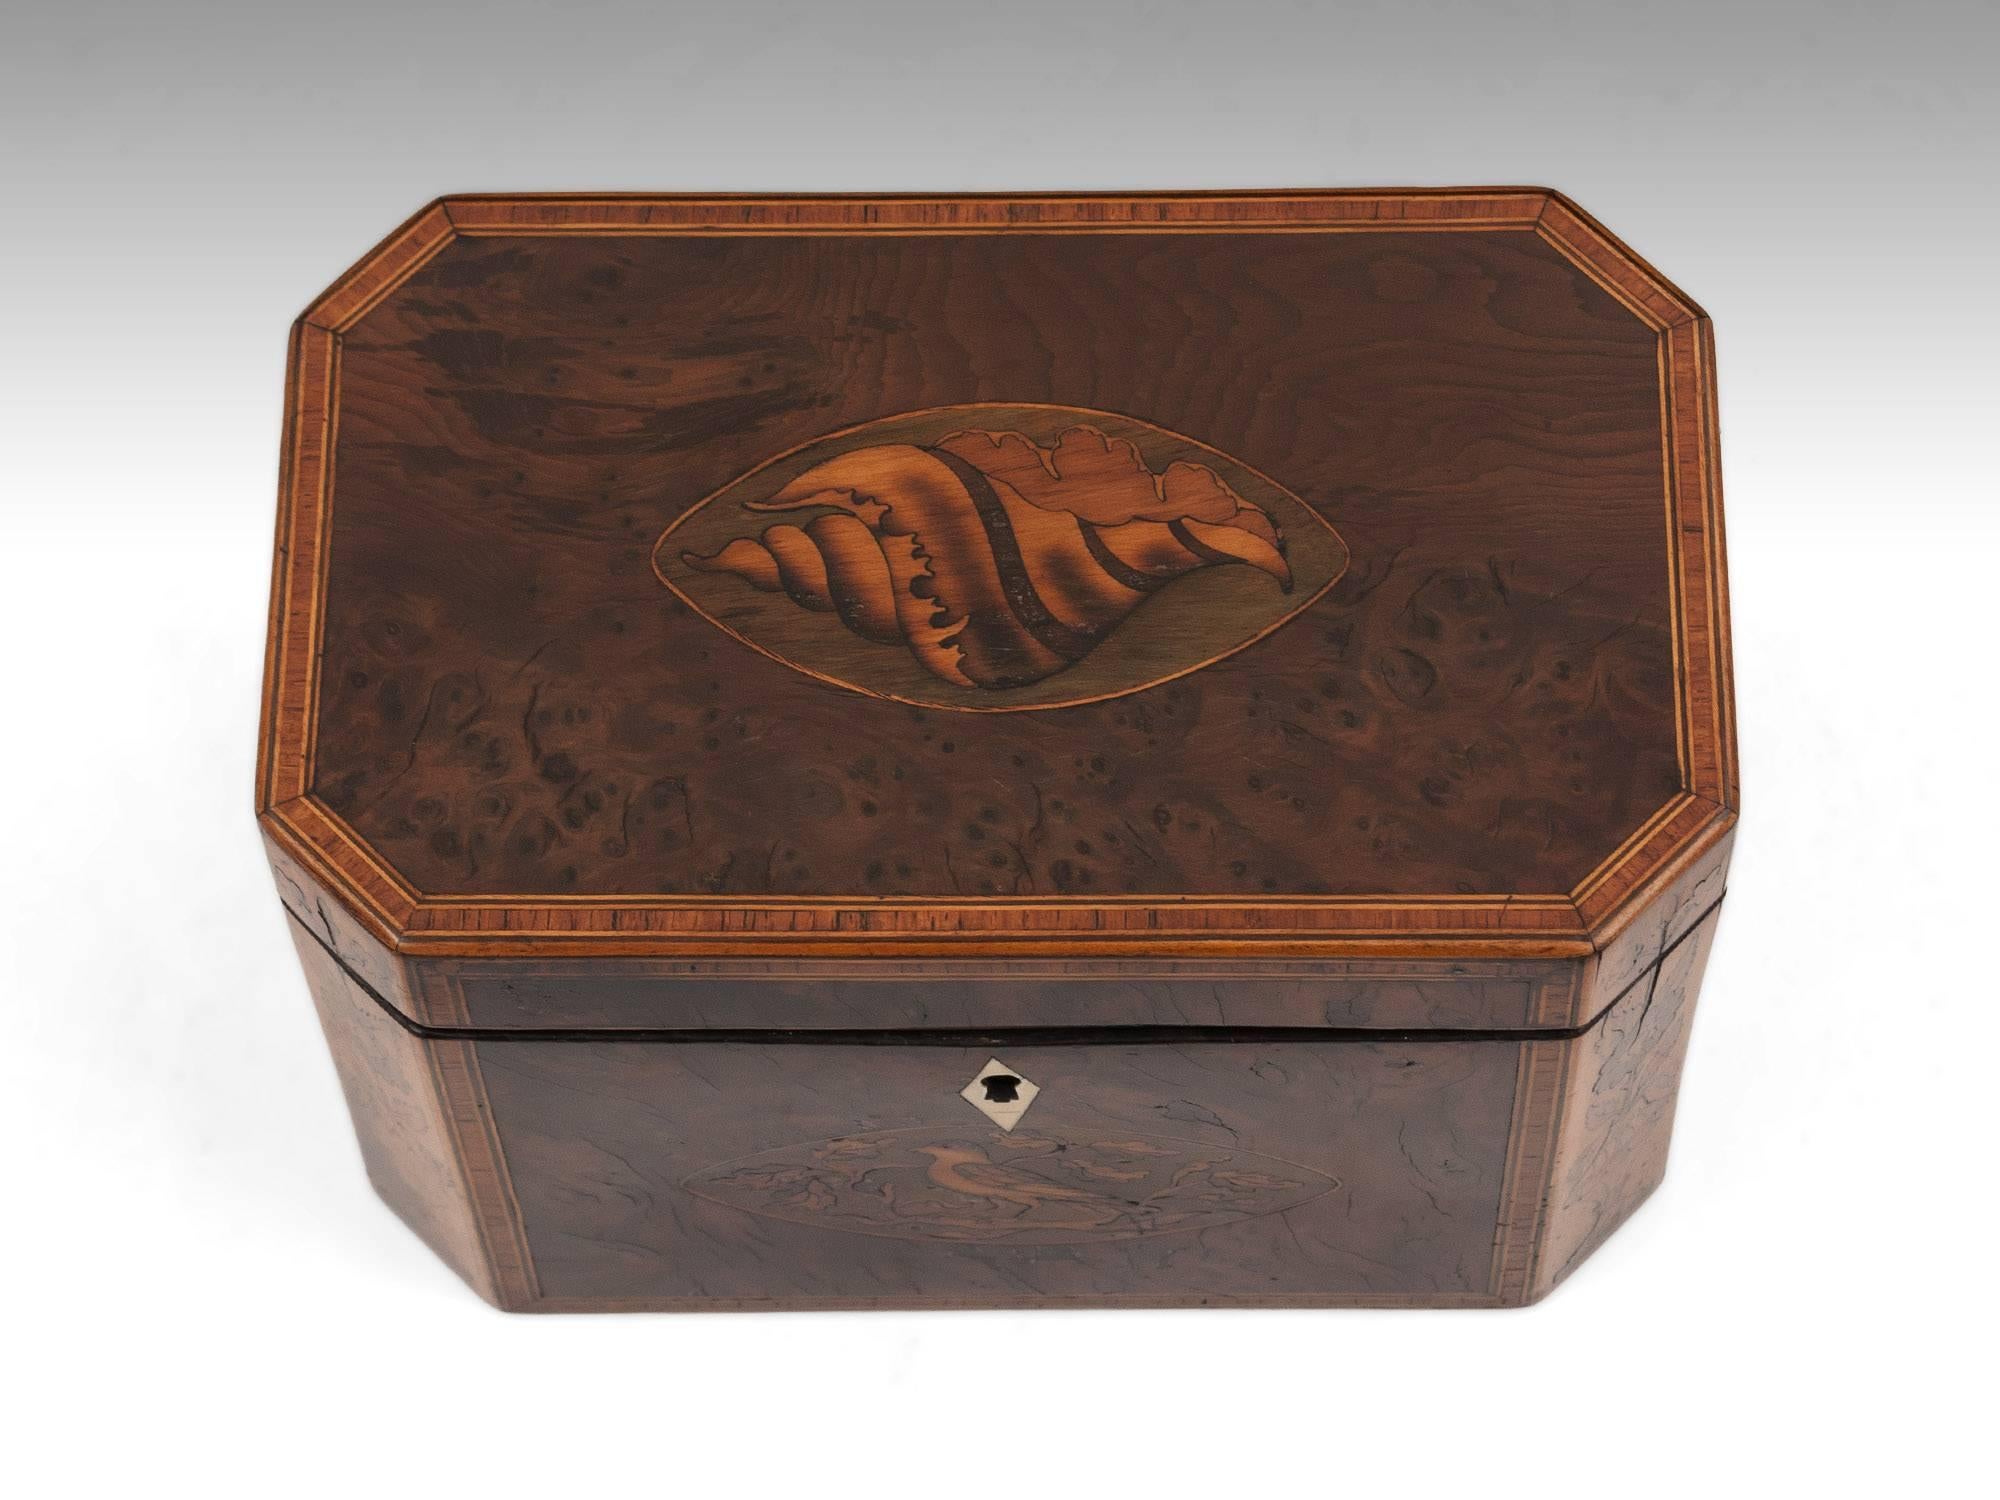 Antique burr yew tea caddy with an inlaid conch shell to the top, a bird surrounded by oak leaves on the front with a kite shaped bone escutcheon and its cants inlaid with tea plants. 

This fabulous Georgian inlaid tea caddy has two burr yew